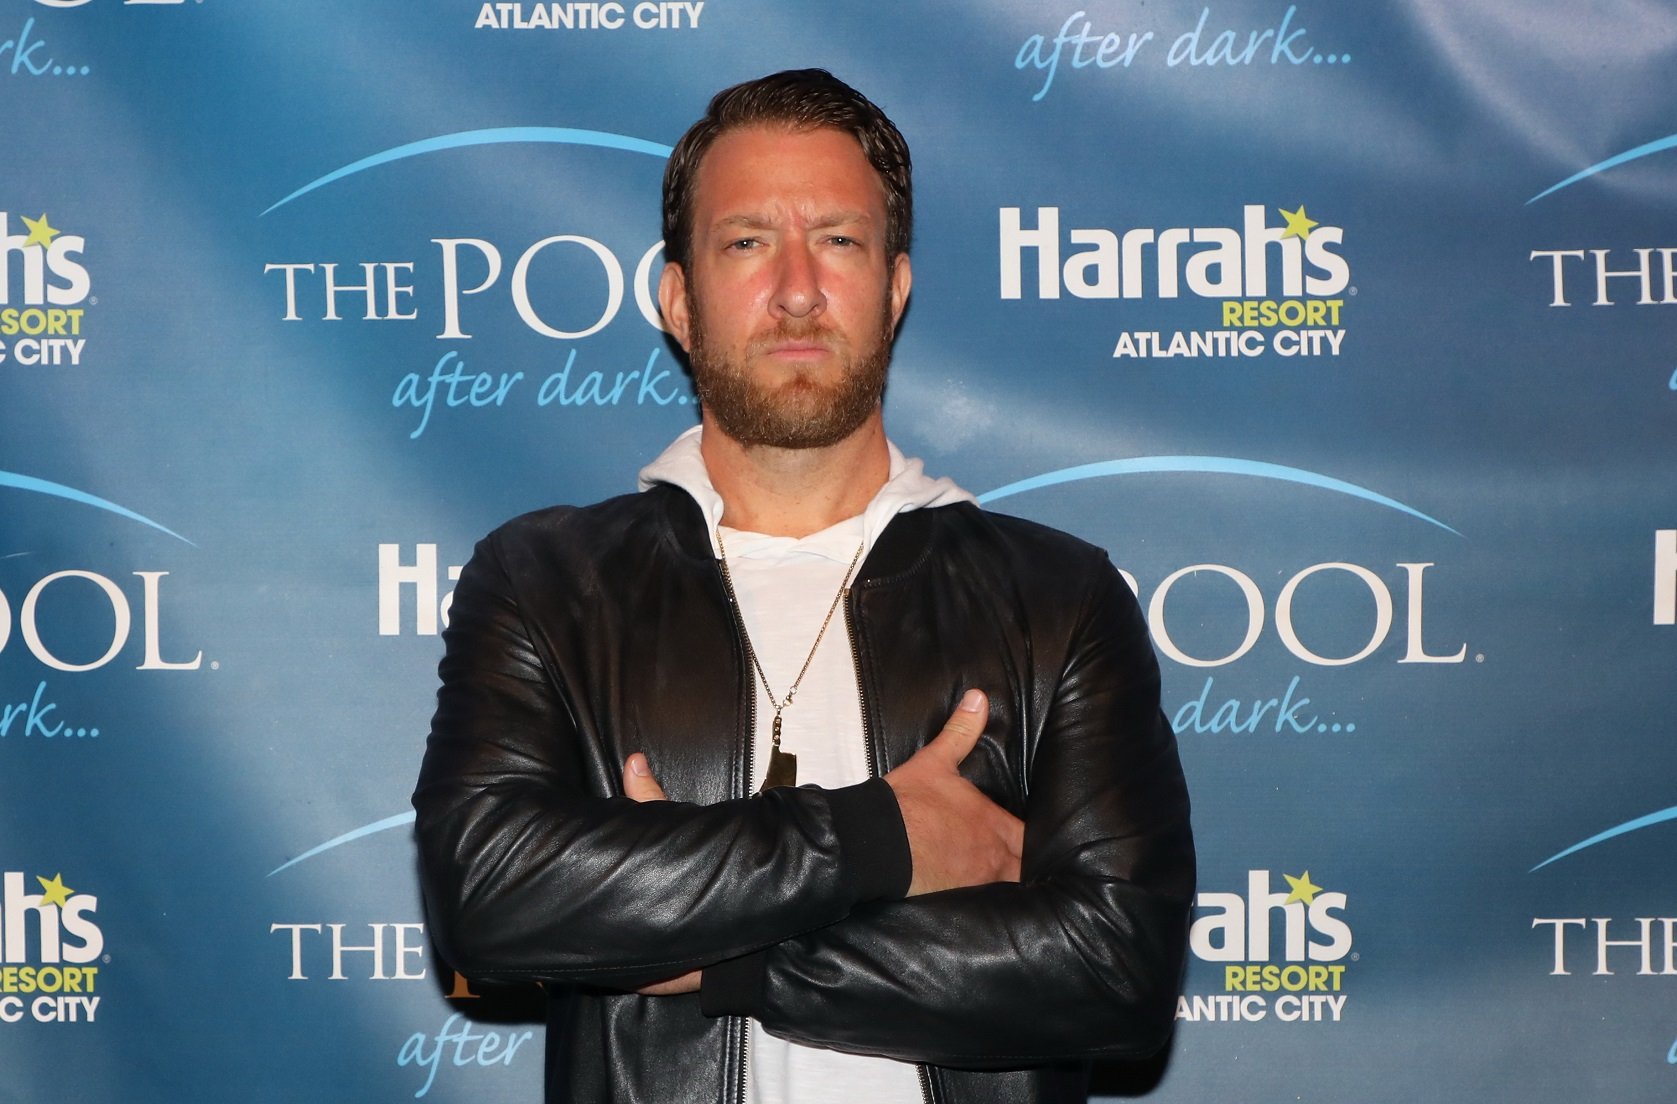 A Year Ago Dave Portnoy Sold Barstool For $350 Million. He Just Bought ...